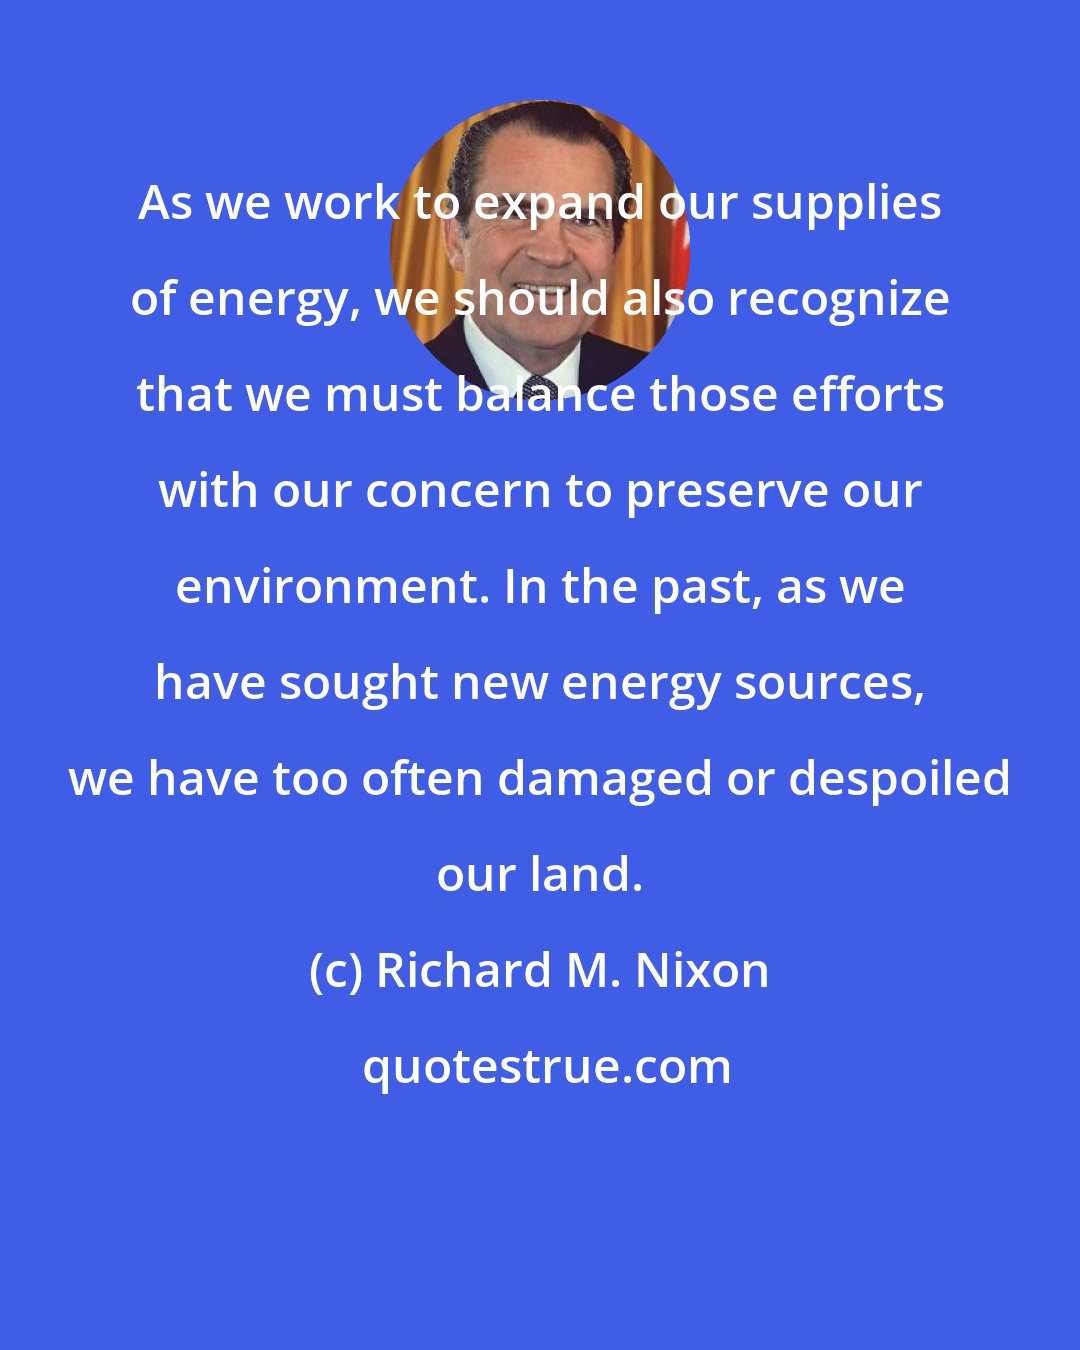 Richard M. Nixon: As we work to expand our supplies of energy, we should also recognize that we must balance those efforts with our concern to preserve our environment. In the past, as we have sought new energy sources, we have too often damaged or despoiled our land.